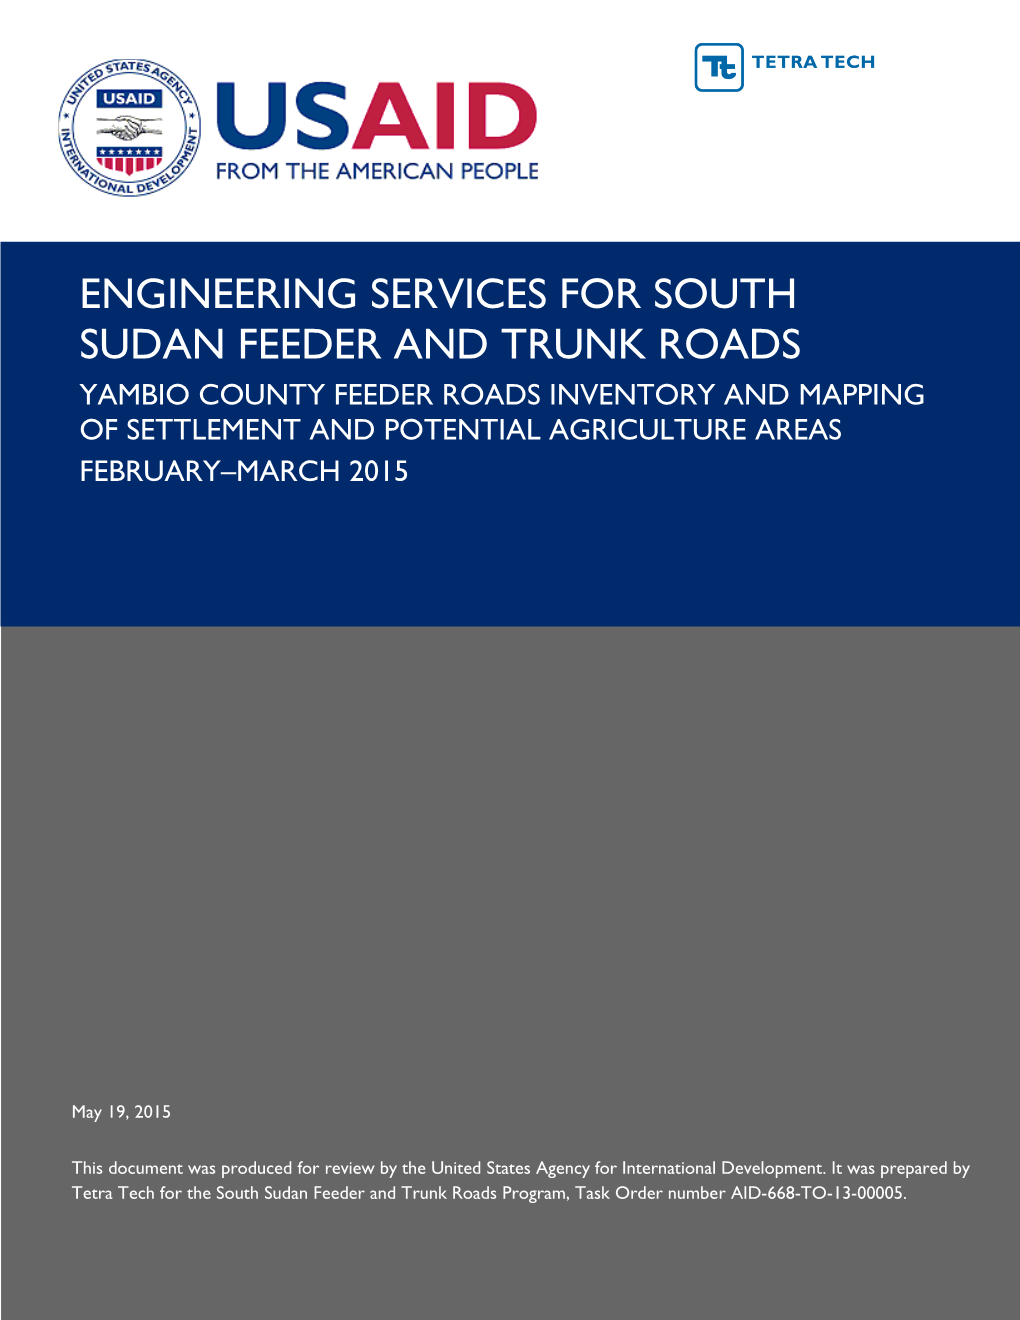 Engineering Services for South Sudan Feeder And